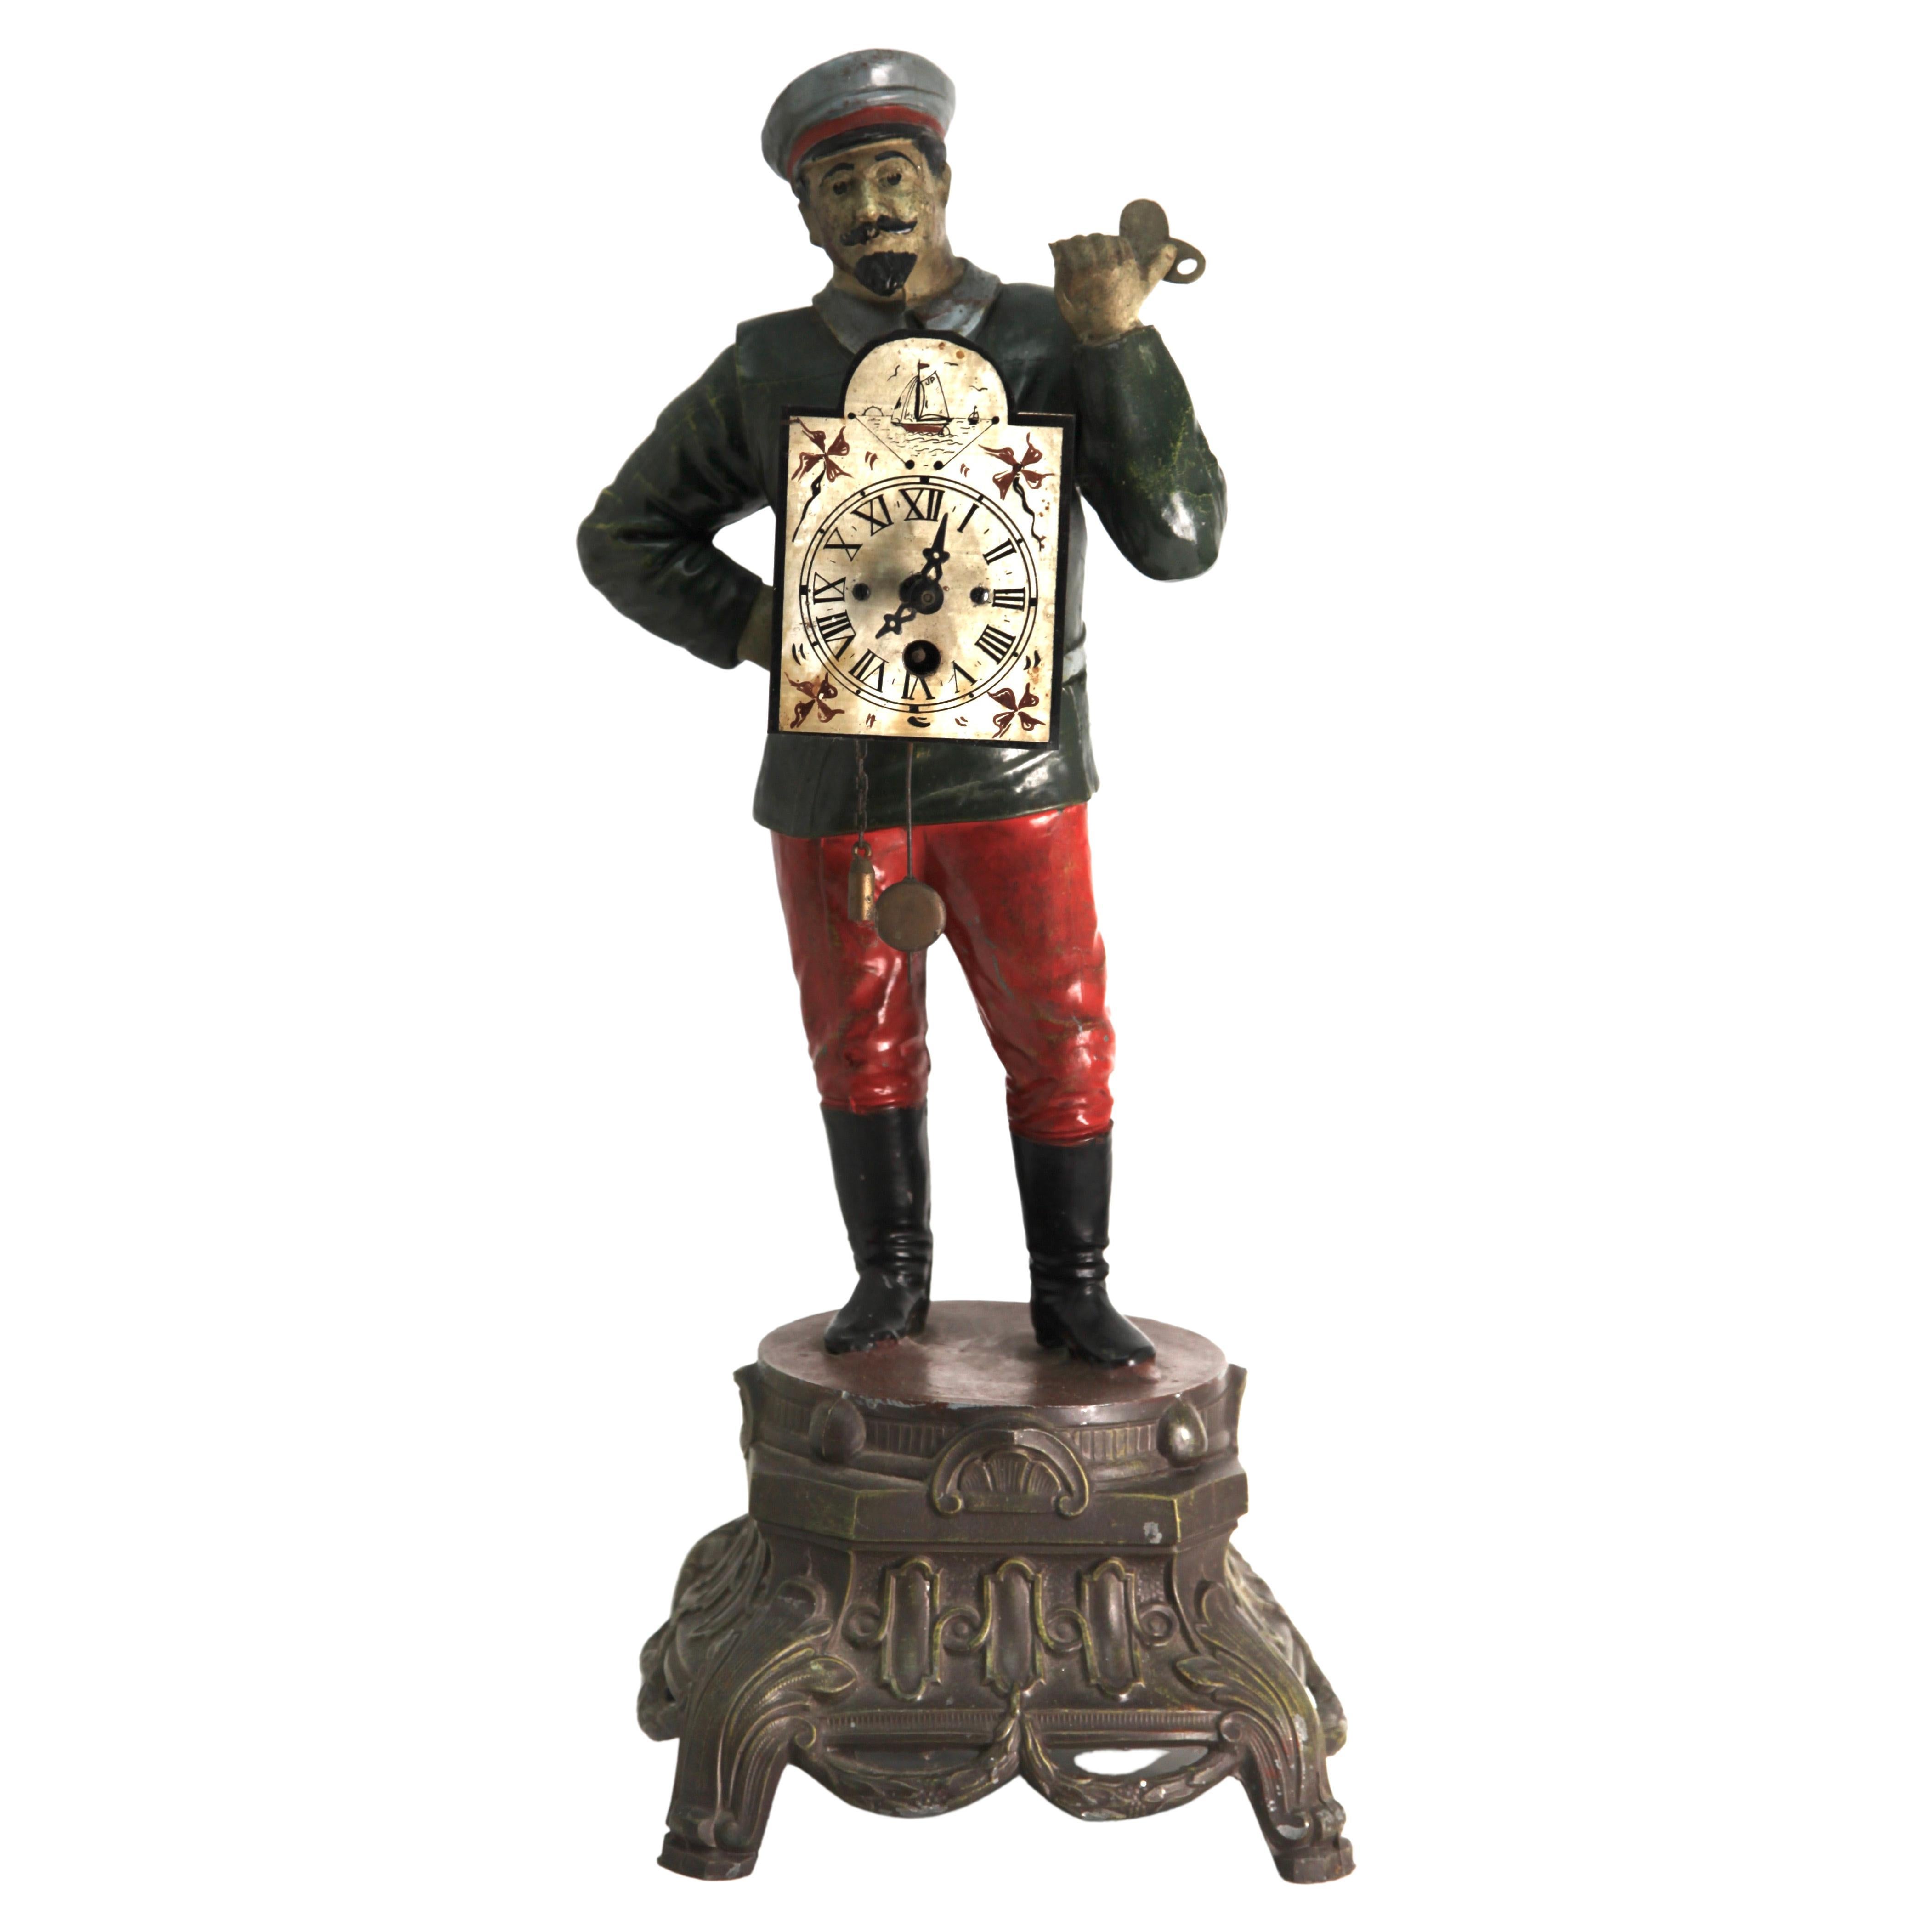 Clock Man - Wind-up clock with key - Spelter, hand-painted

We prefer to sell our items in 'uncleaned' condition so that the new owner still has the choice to remove the patina (signs of age) or not.
The timepiece needs to be checked and cleaned.